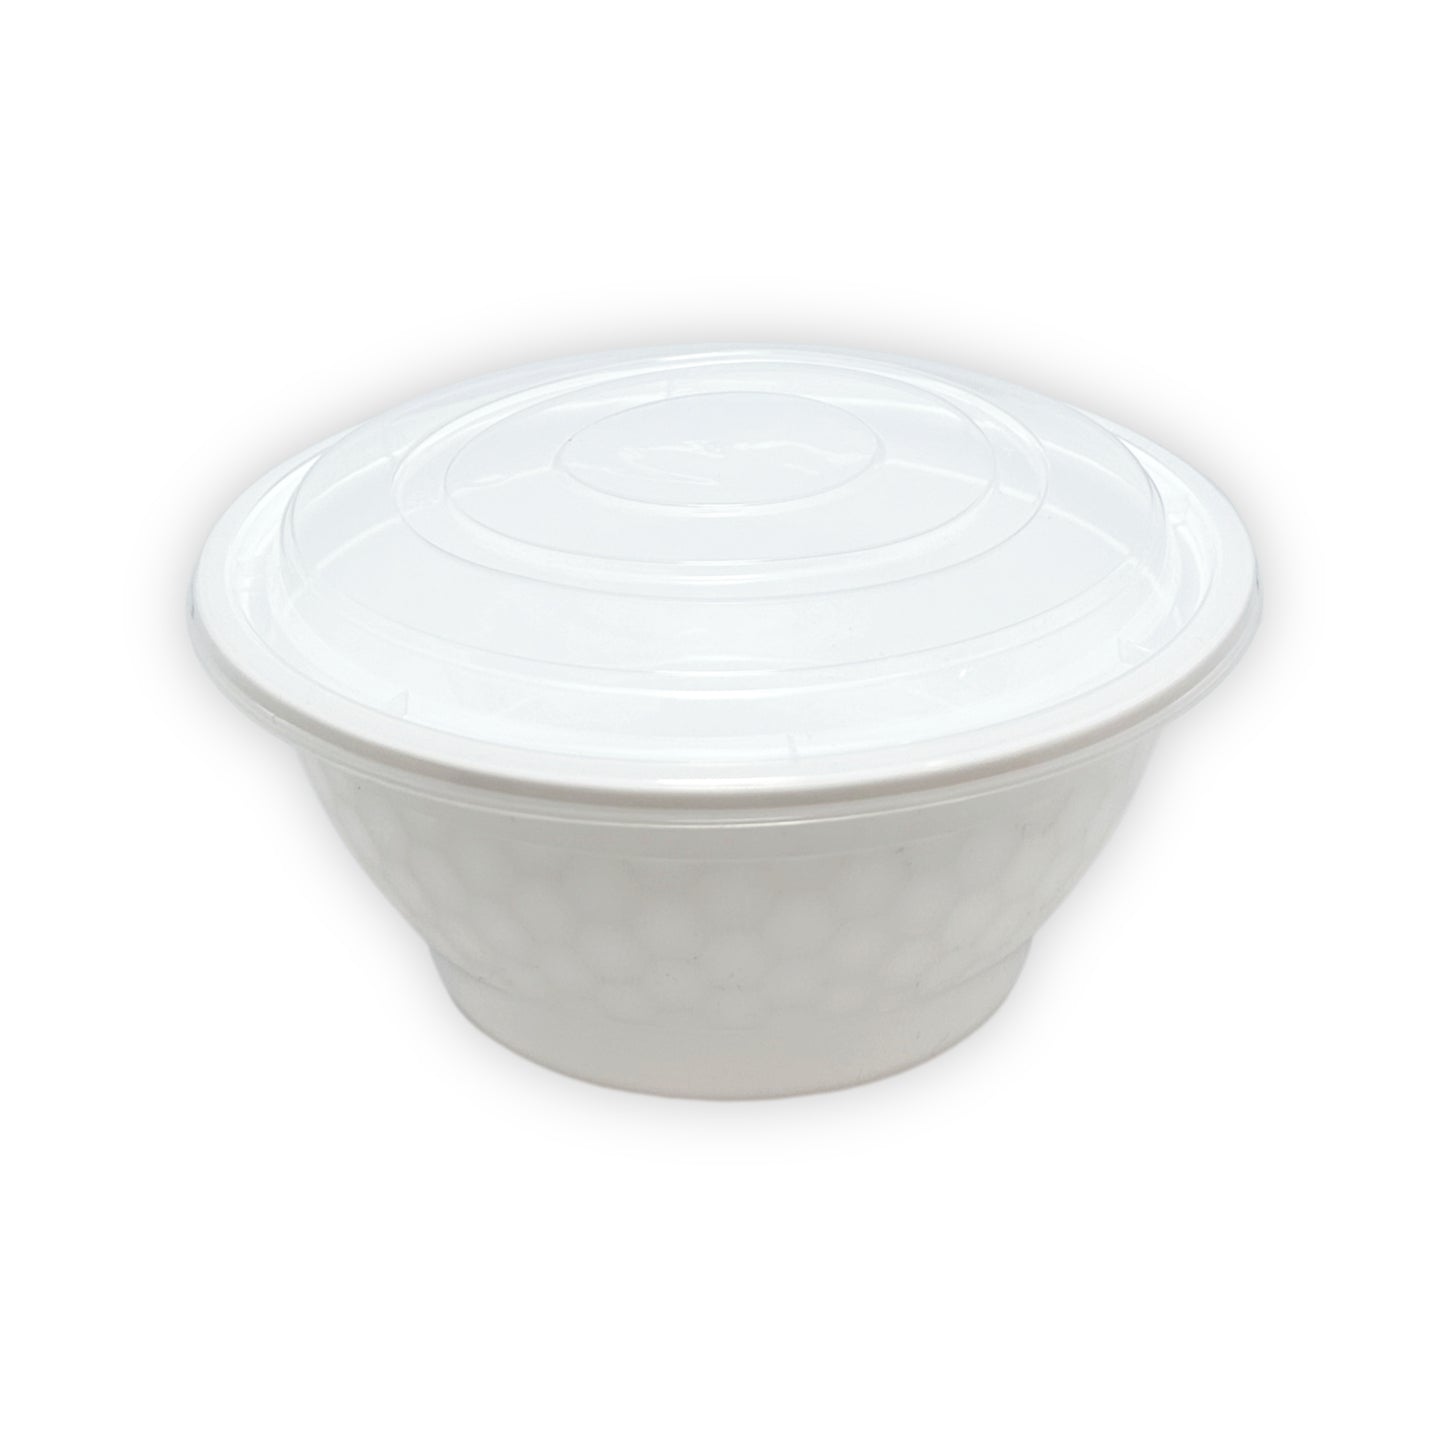 KIS-BO32G | 150sets 32oz, 946ml White PP Round Bowl with Clear Lids Combo; $0.246/set